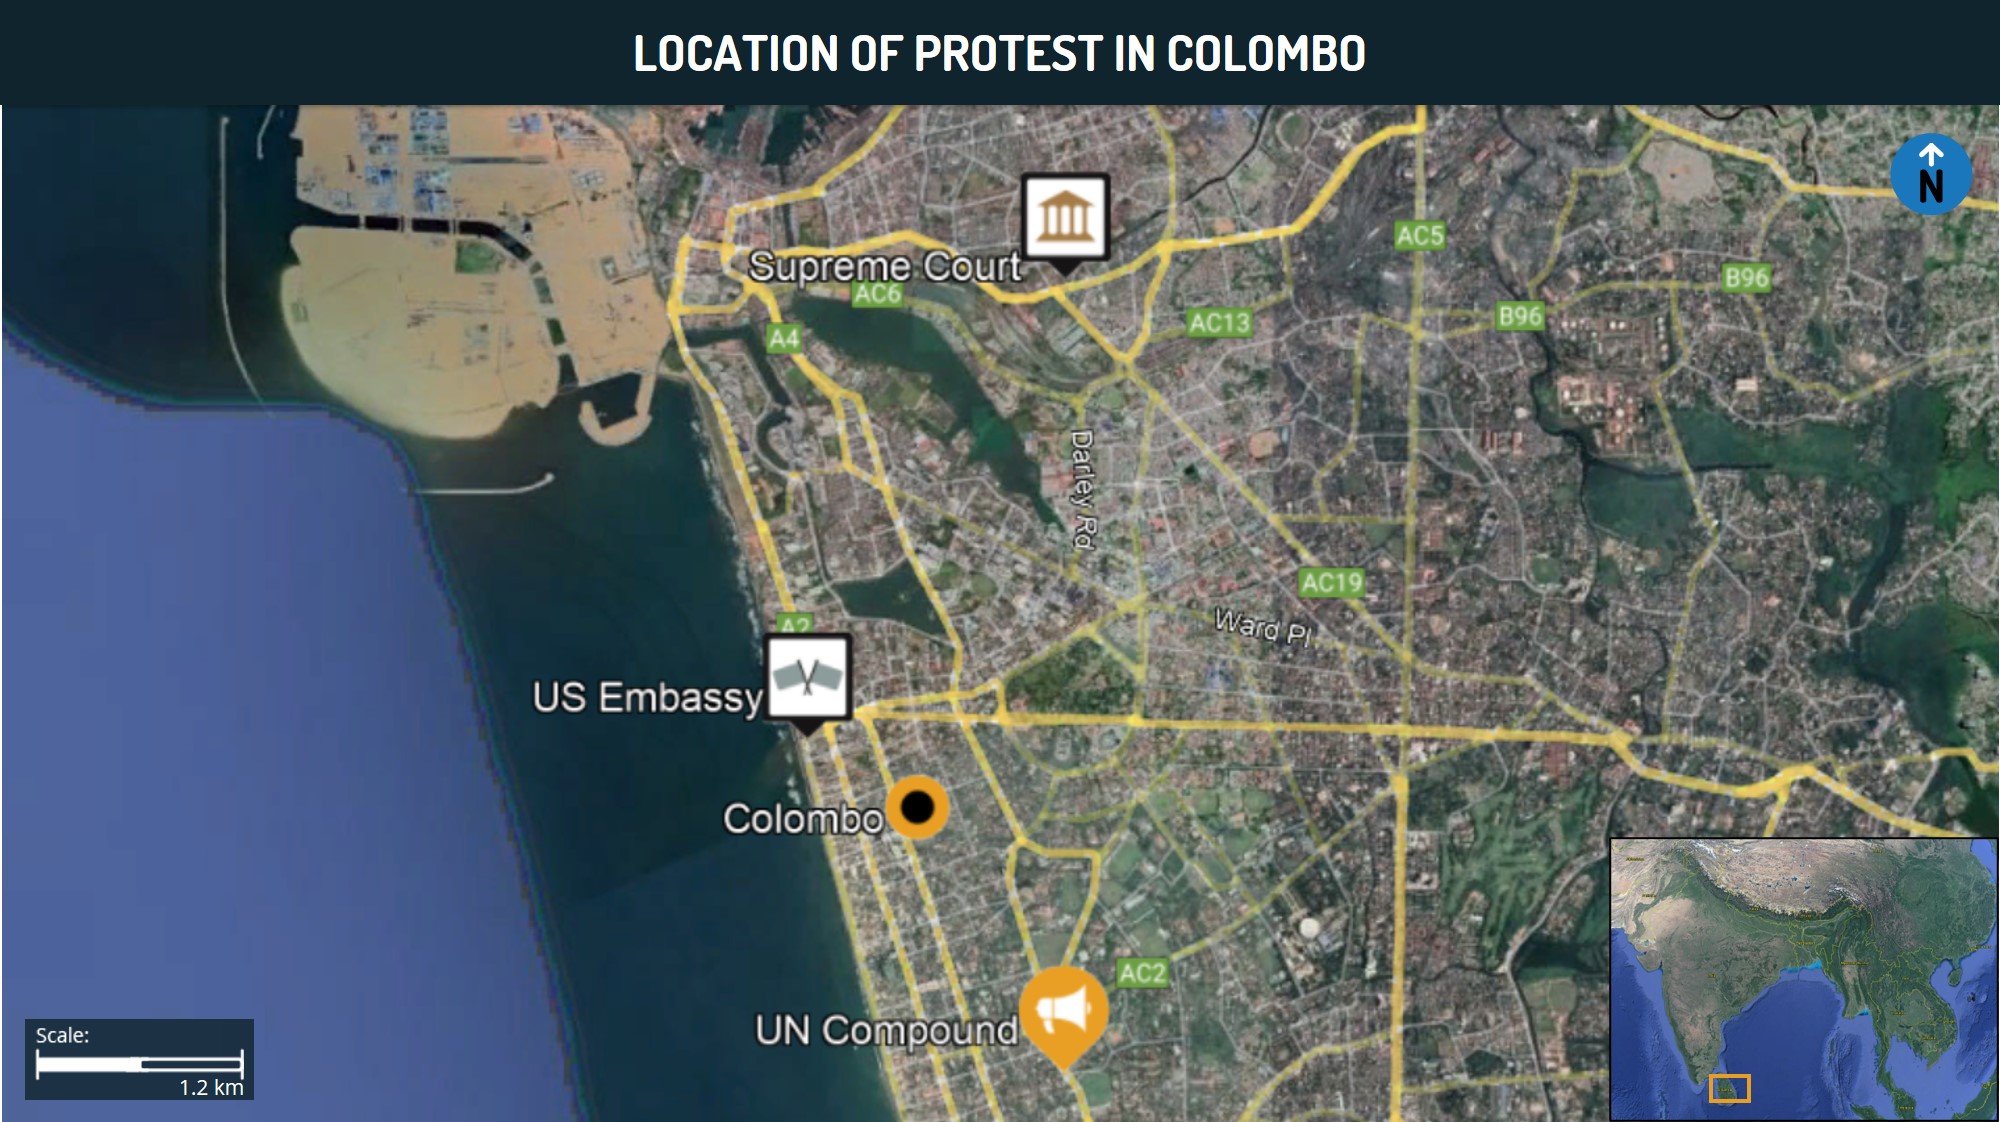 Sri Lanka Pro-Ukraine to be held outside UN in Colombo at 13:30 (local time) on March 2; vigilance | Security Portal | Max-Security